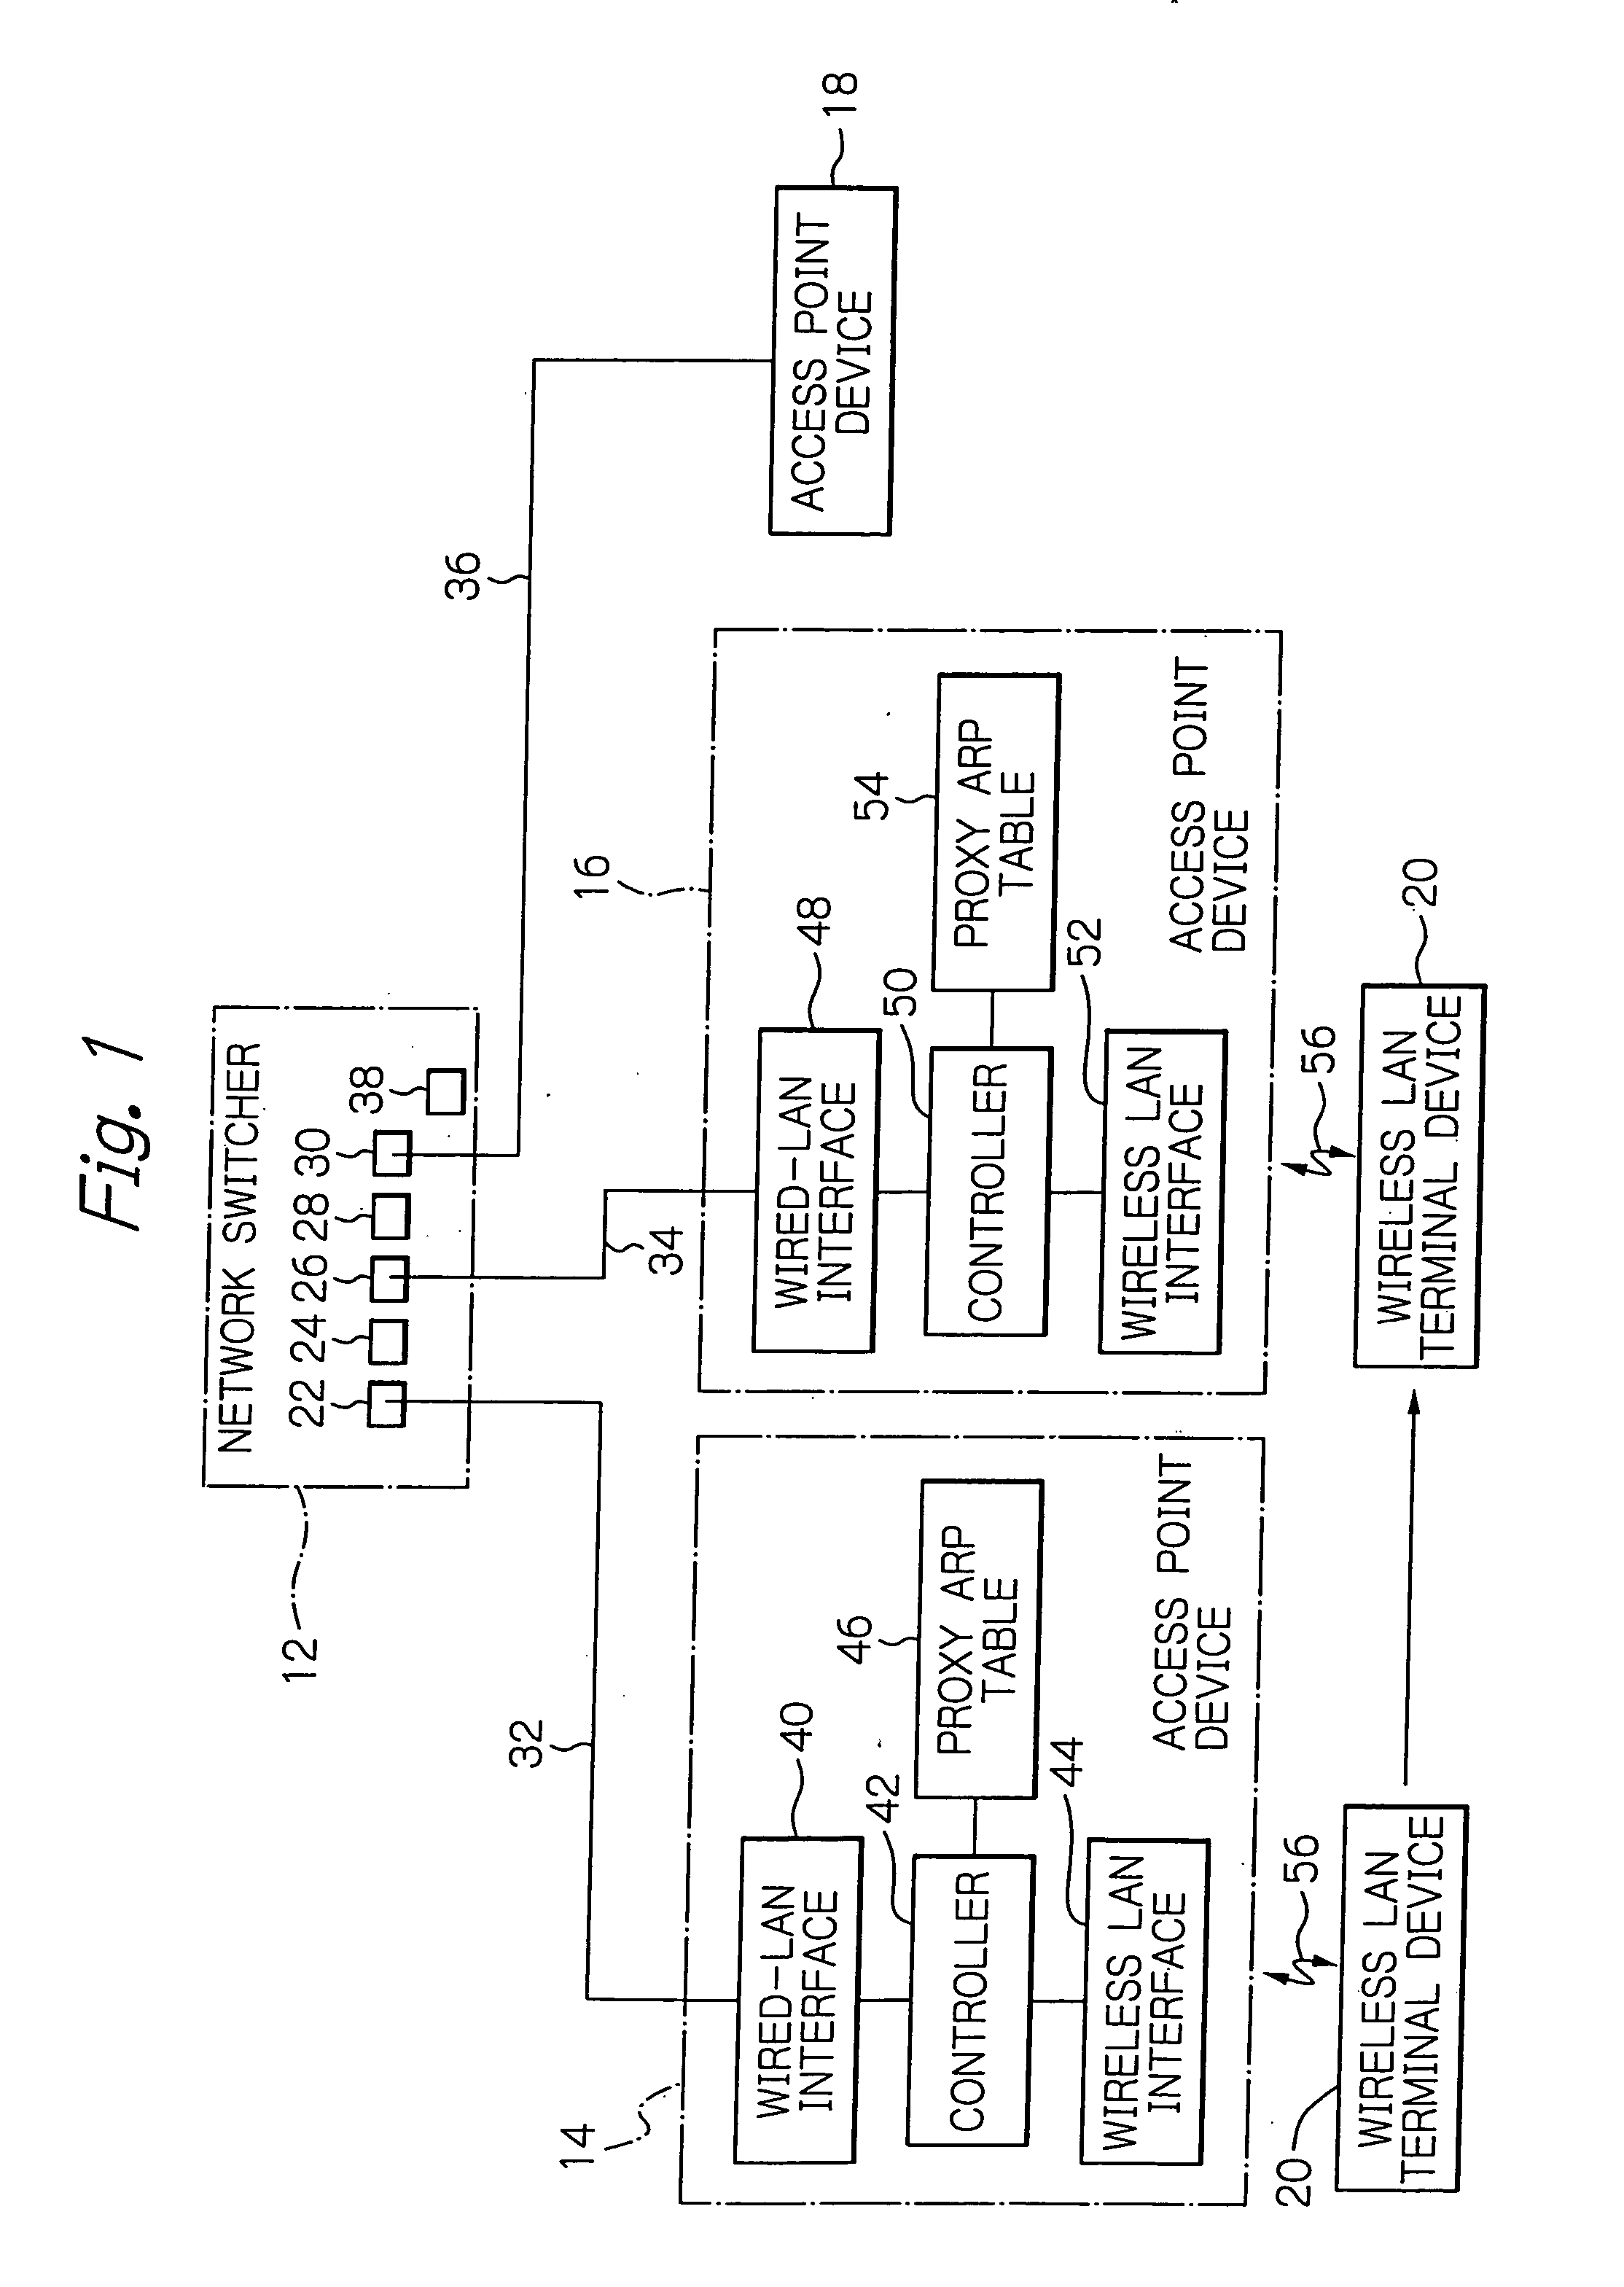 Access point device and a communications system for effectively using a proxy ARP function